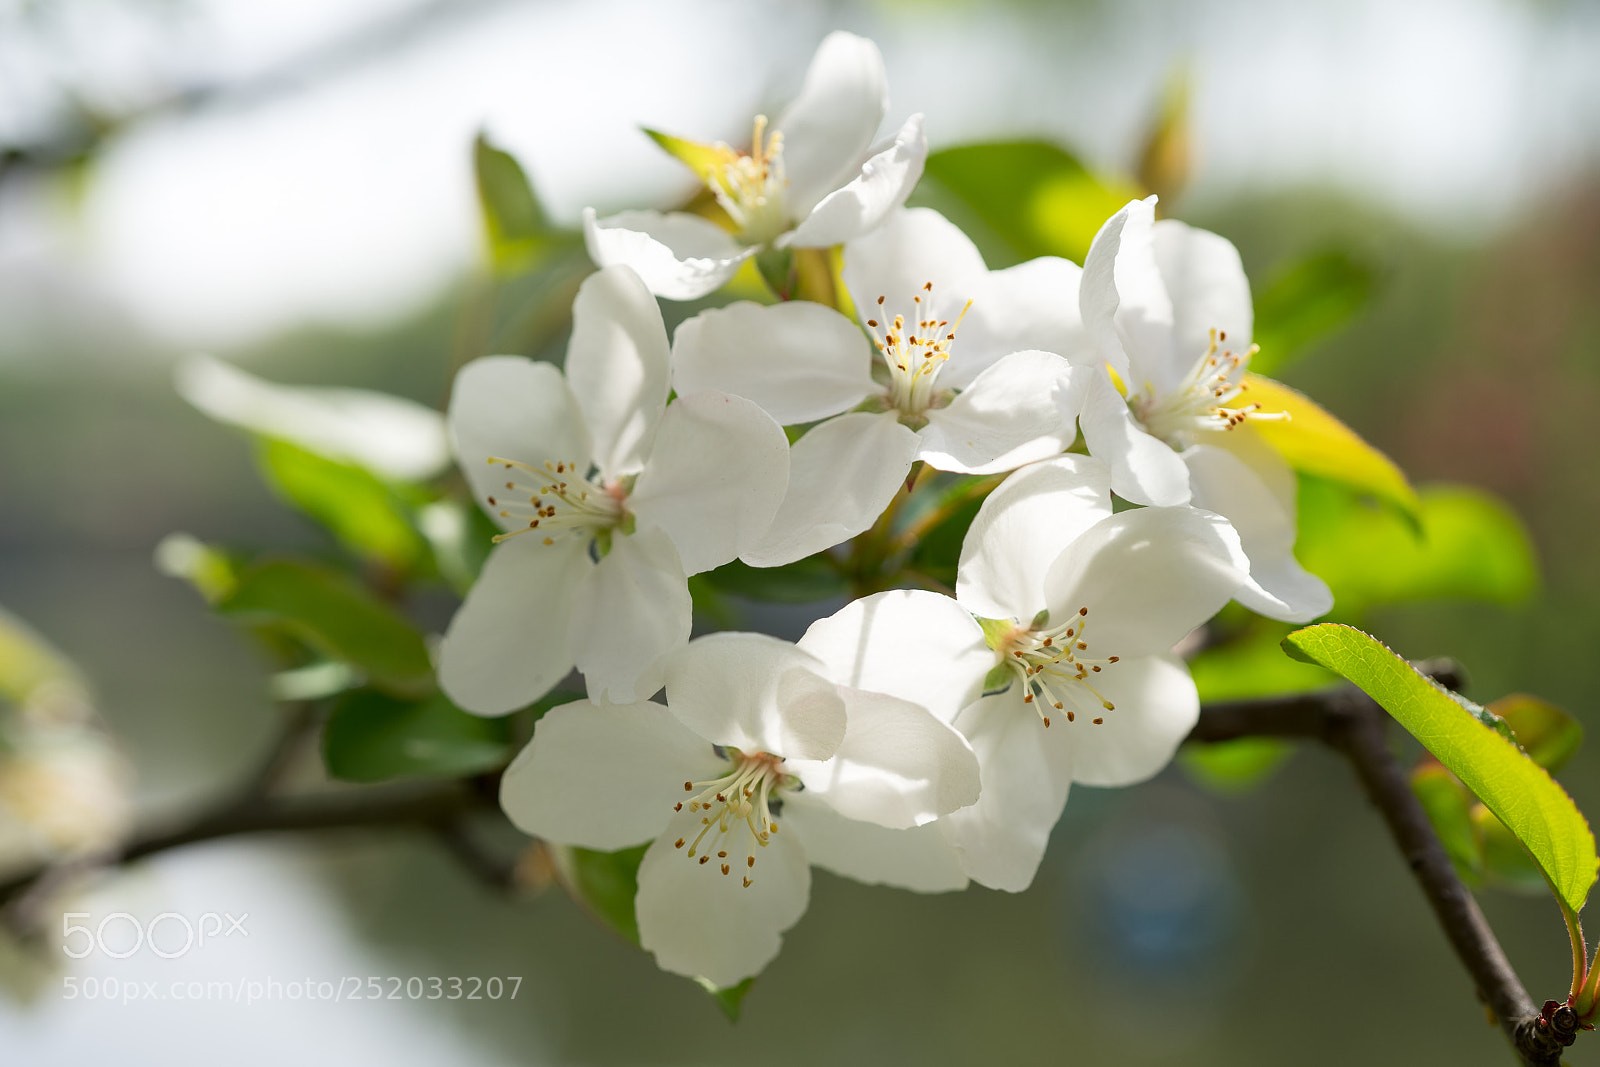 Sony a7 sample photo. Crab apple blossom #6 photography